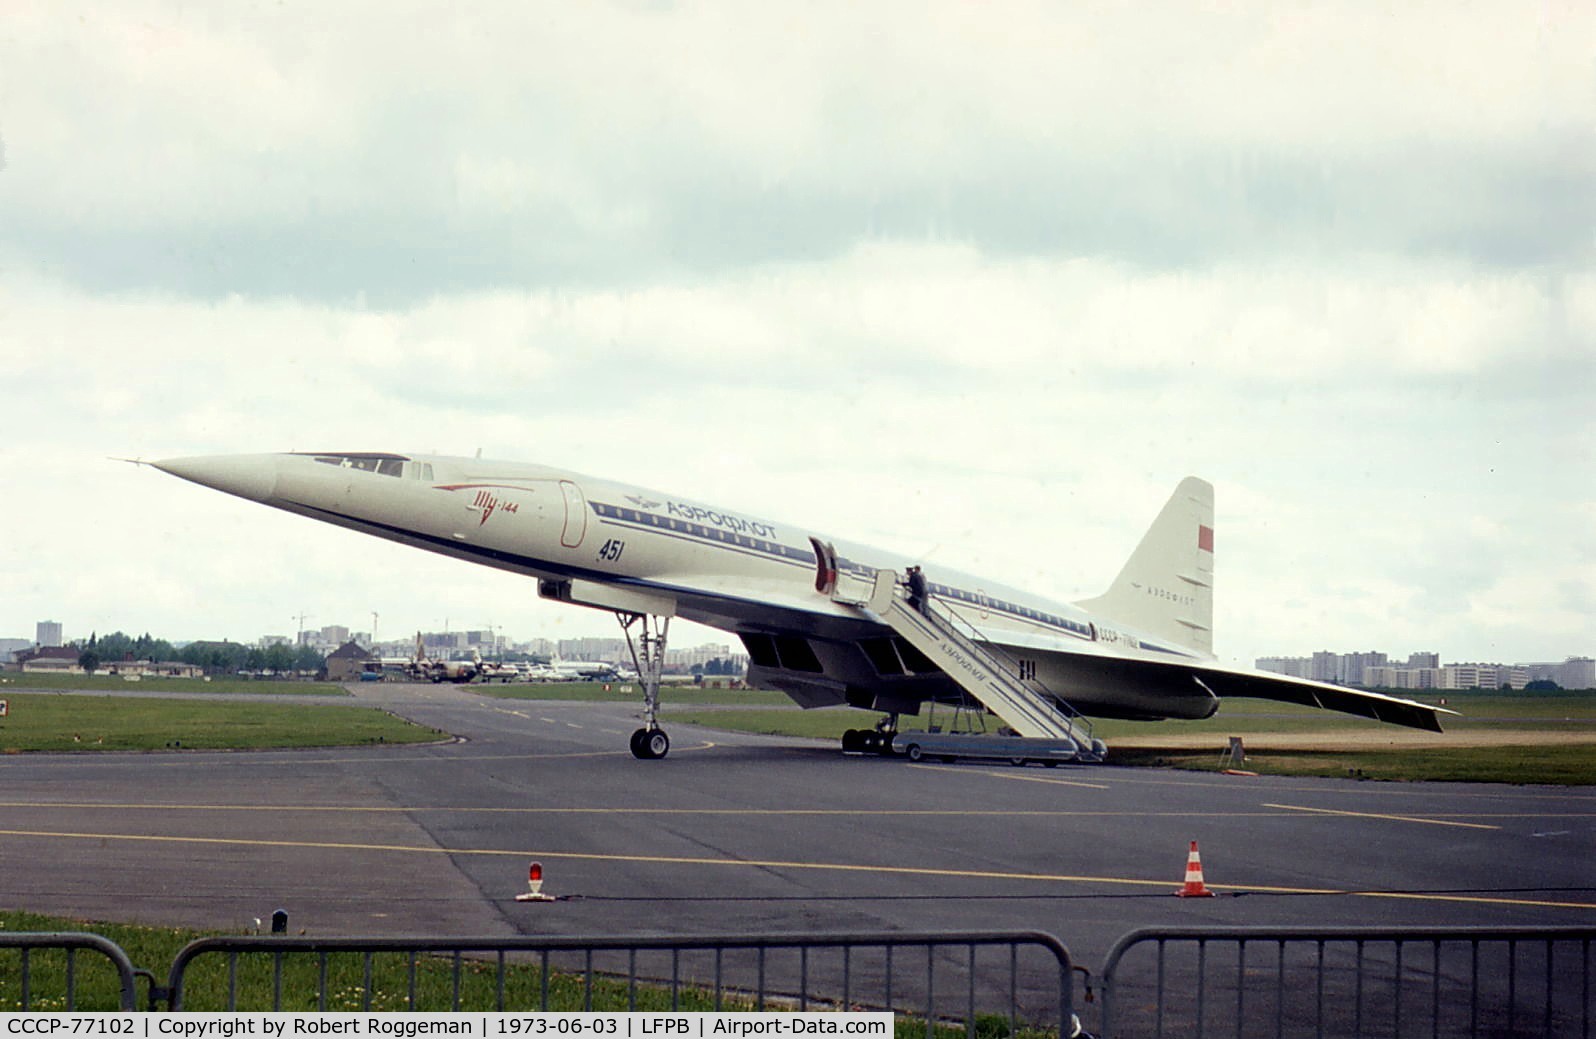 CCCP-77102, 1972 Tupolev Tu-144 C/N 01-2, Crashed later that day during display.